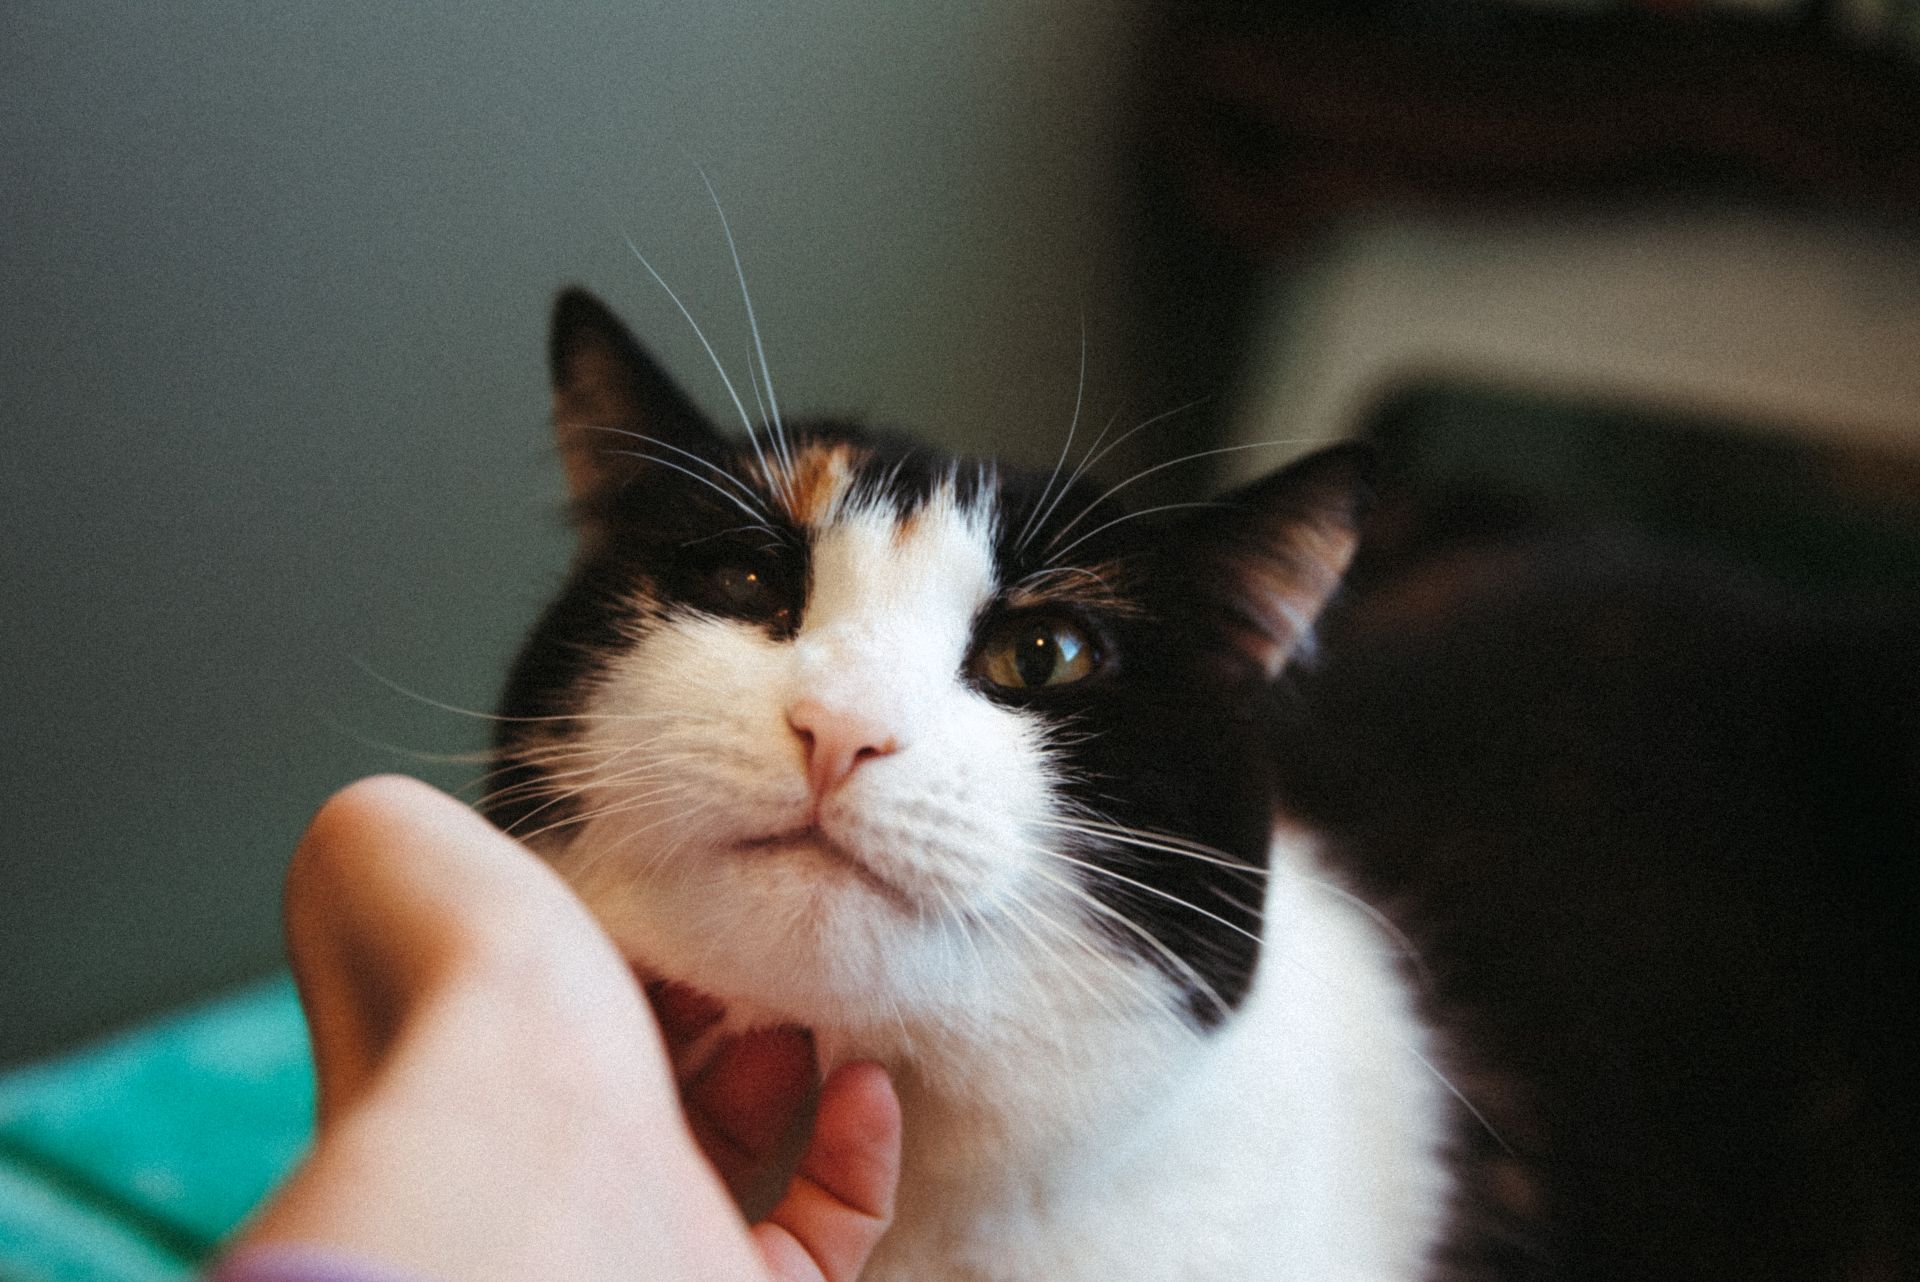 Black and white cat getting chin scratches